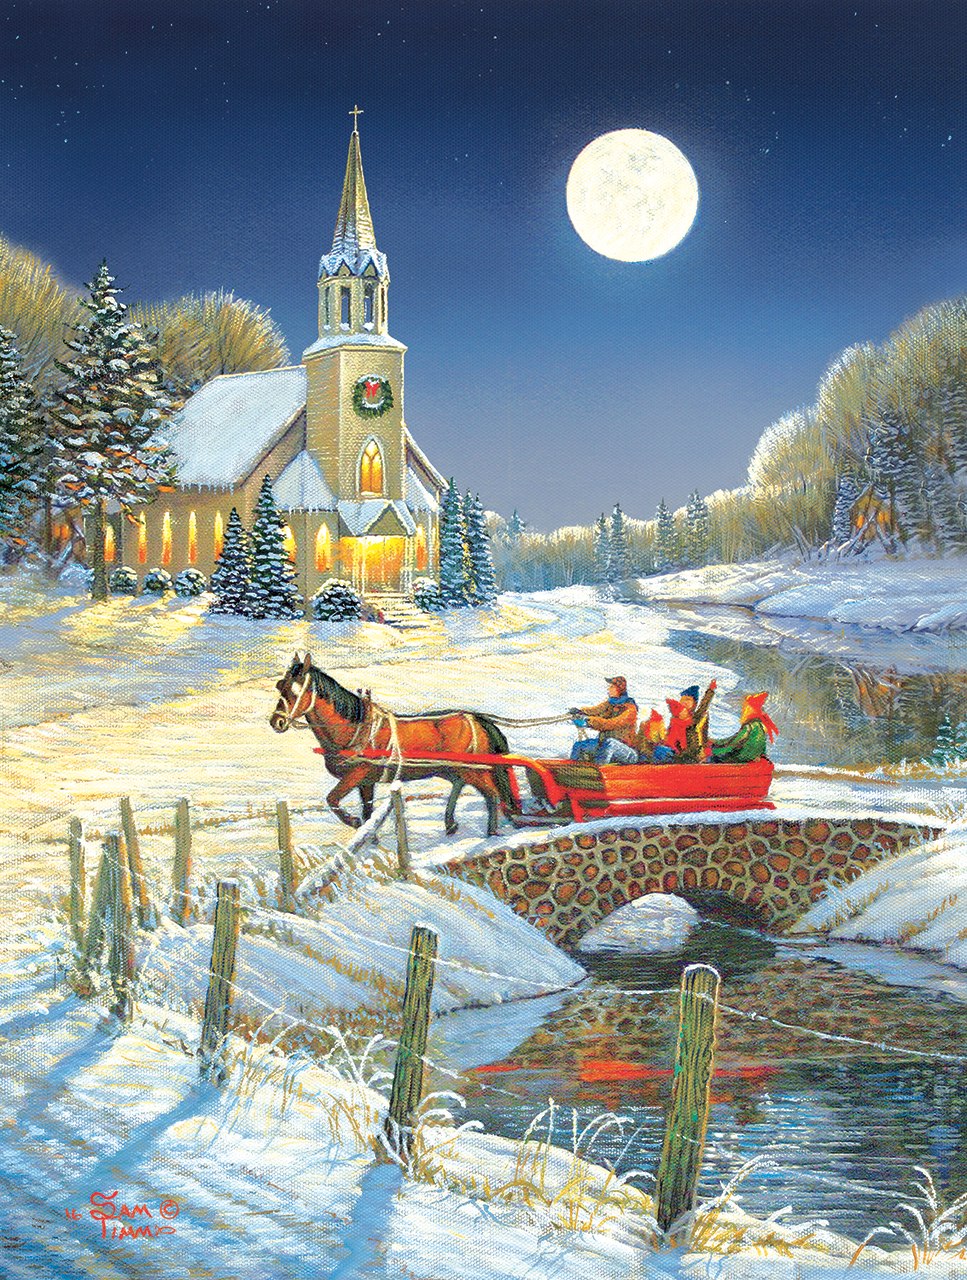 Evening Sleigh - 500pc Jigsaw Puzzle by Sunsout  			  					NEW